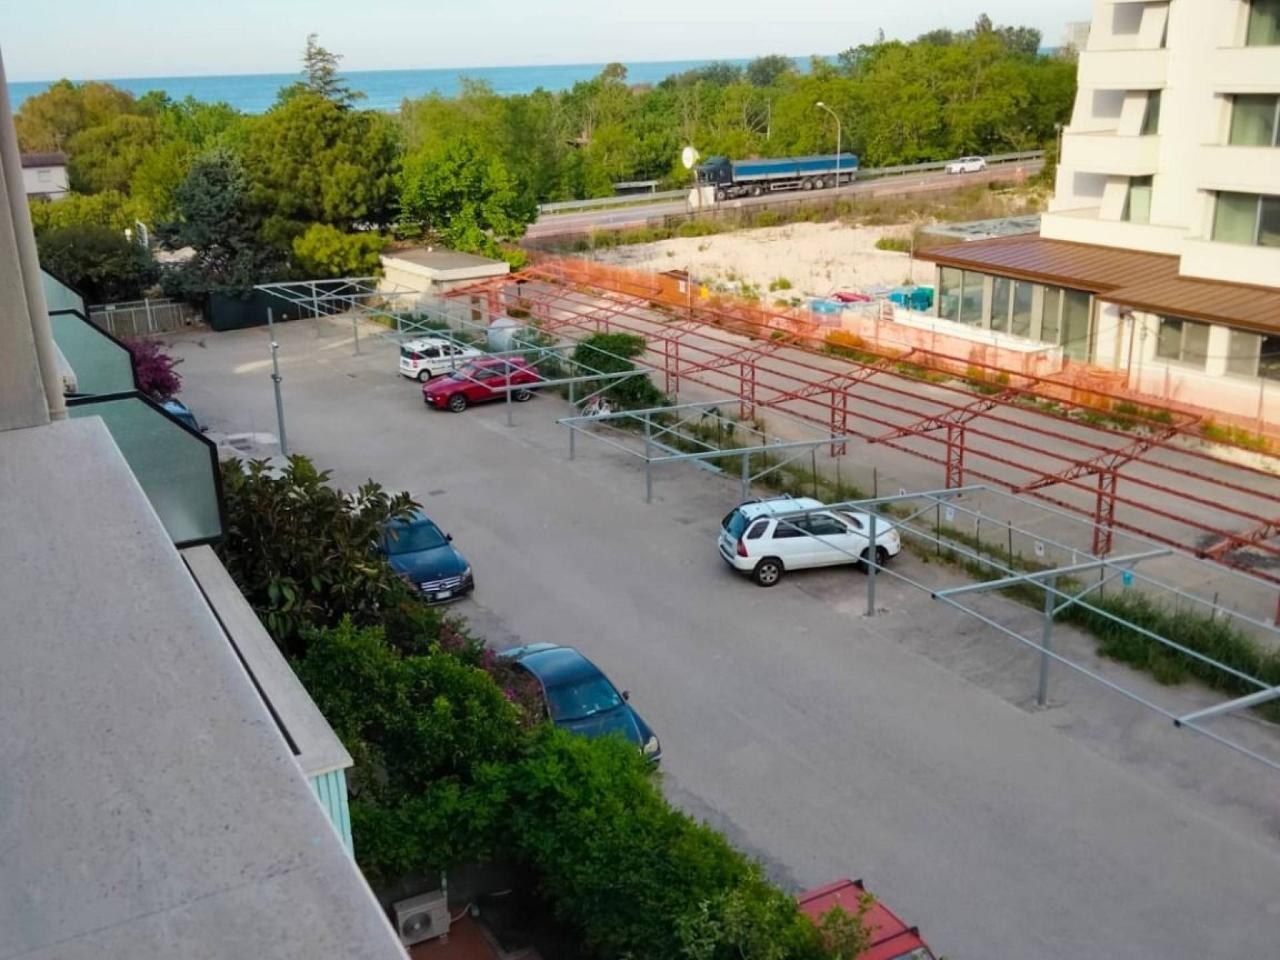 Palazzina commerciale in affitto a Vasto